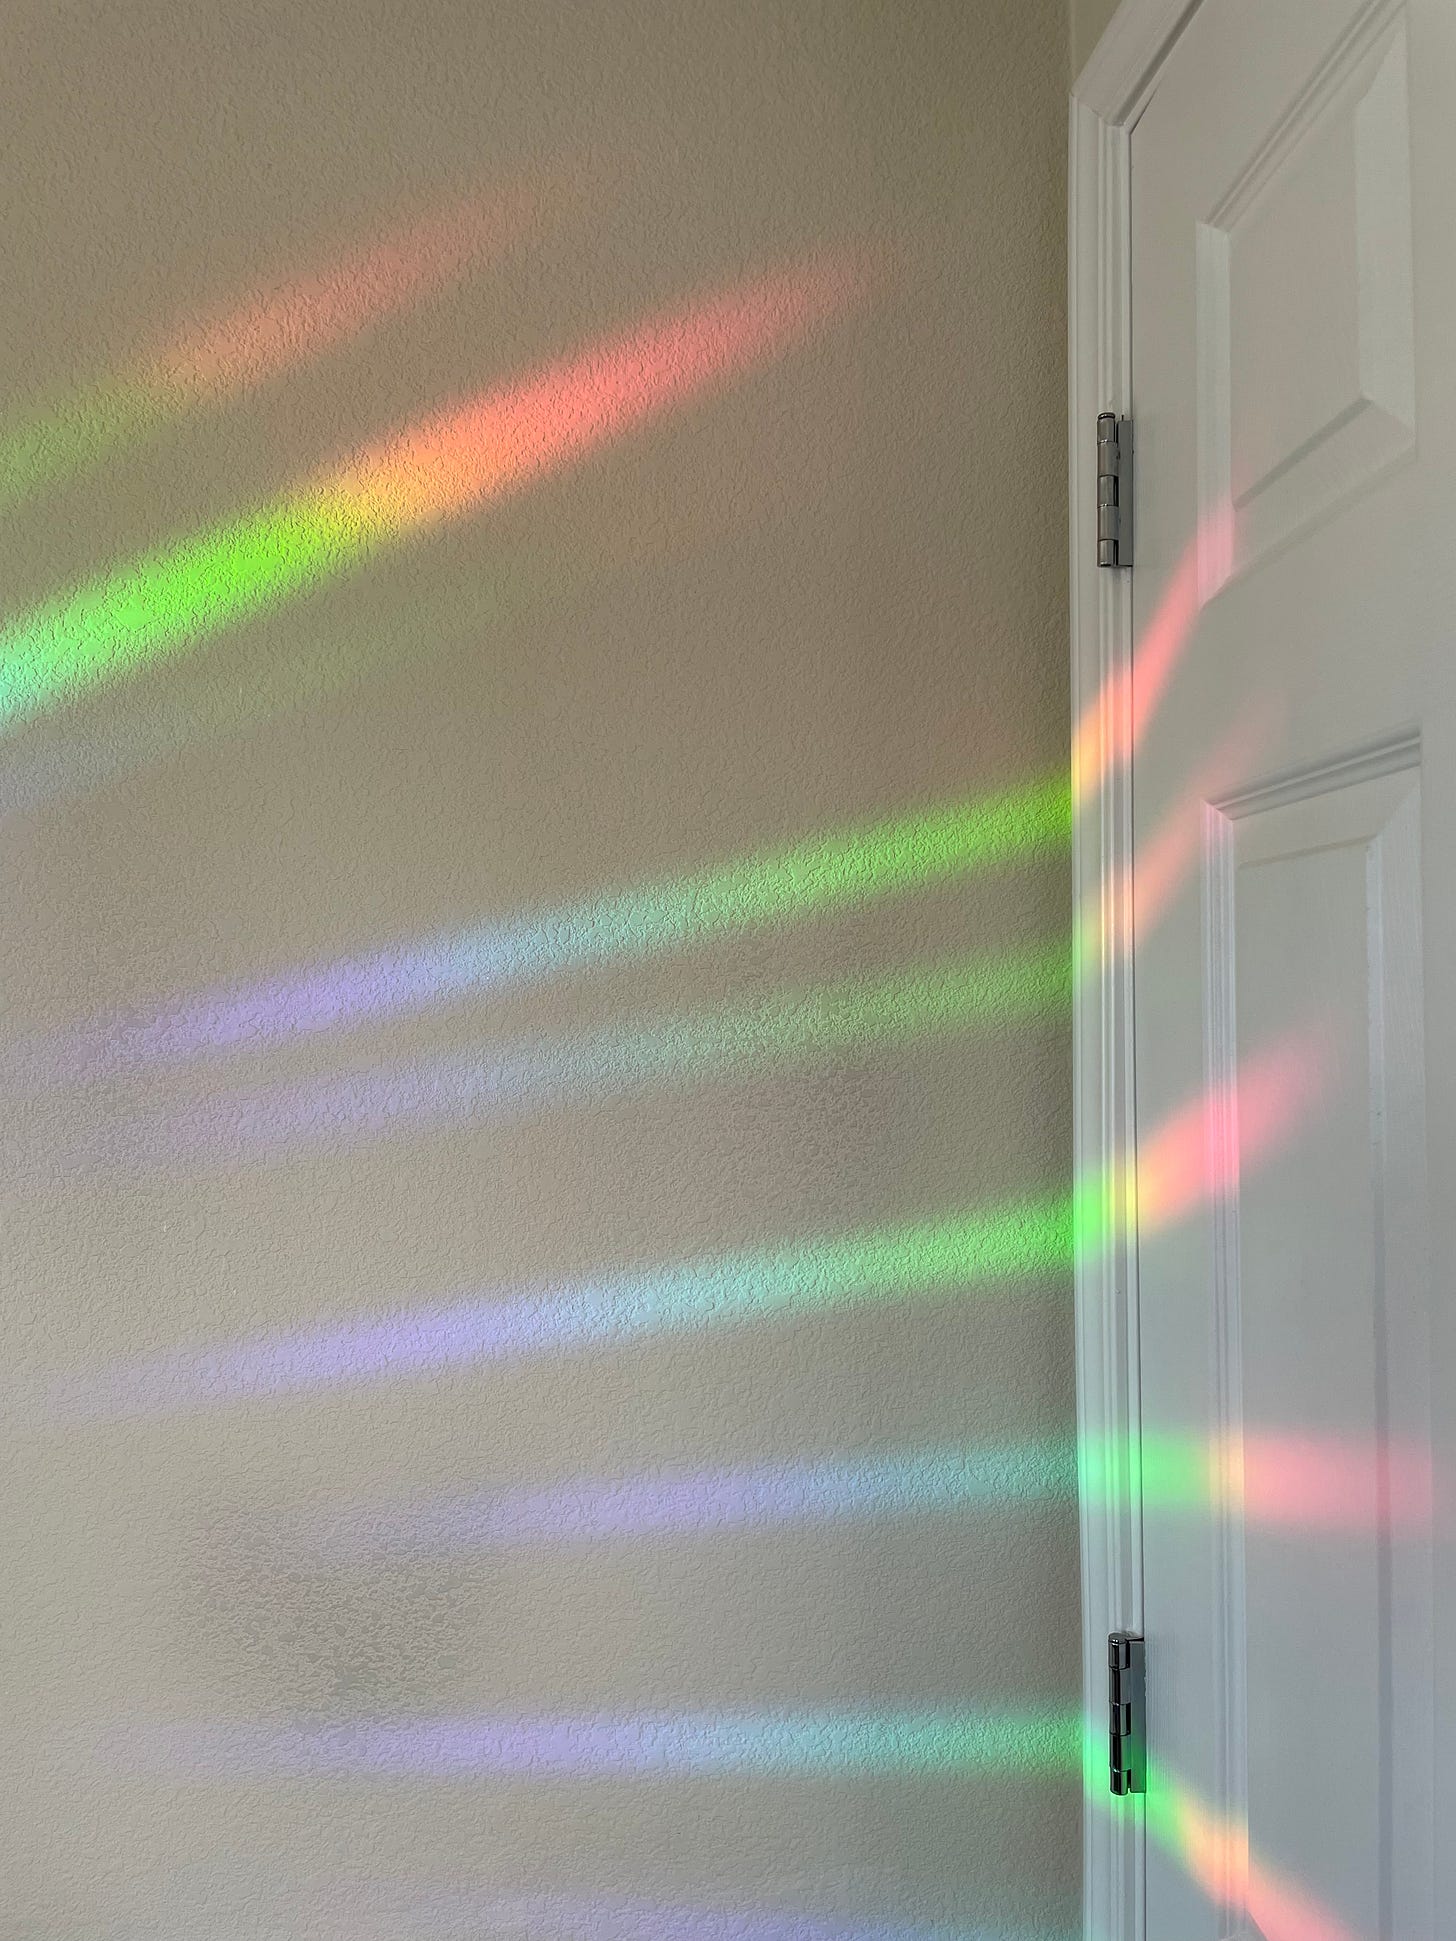 Rays of rainbow-colored light shown against a white wall and door. 